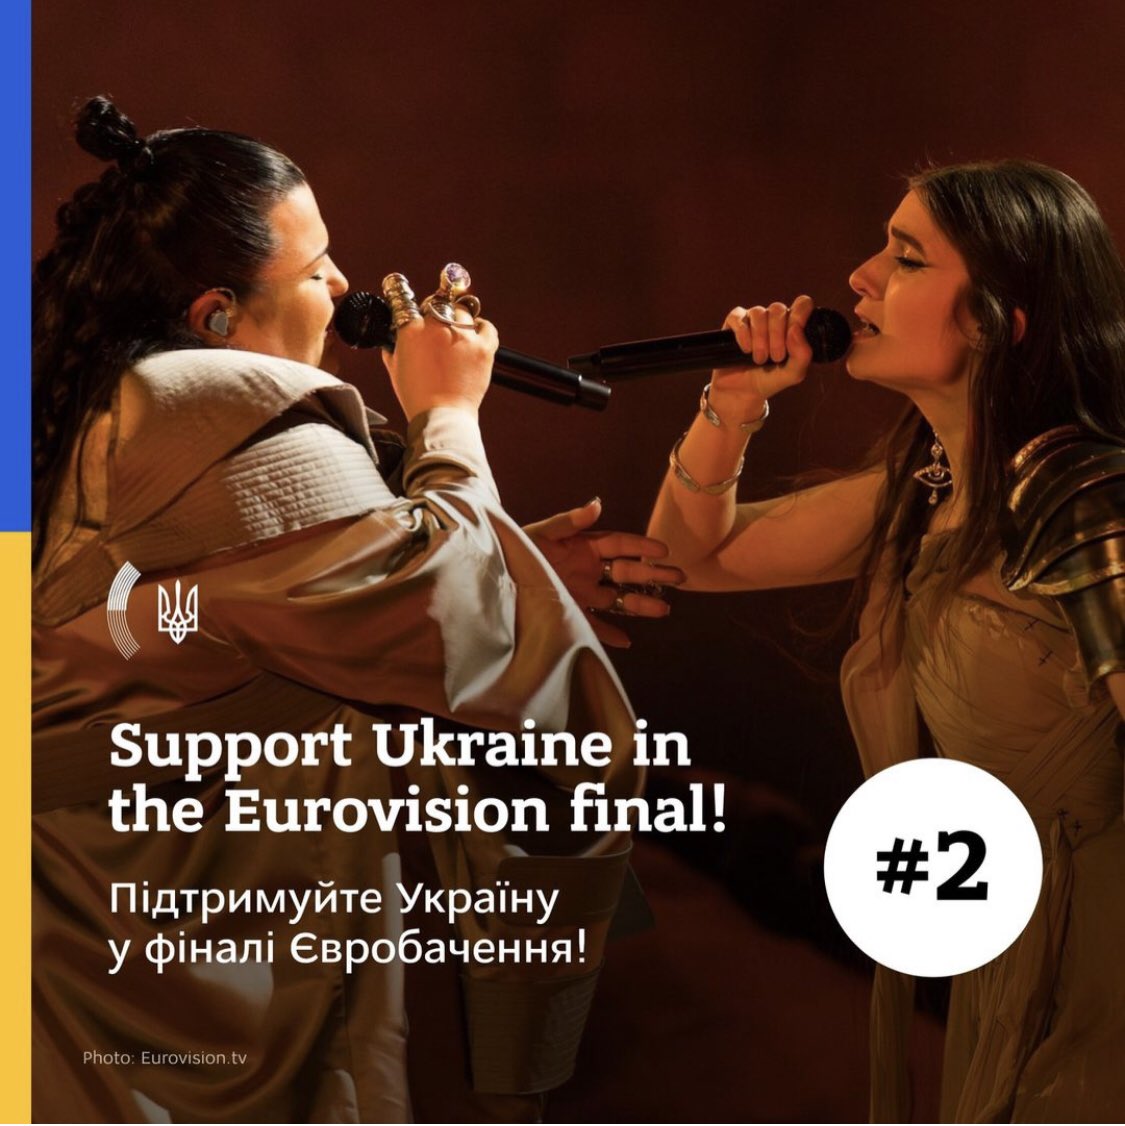 🇺🇦 Watch and support Ukraine under #2 in #Eurovision final this Saturday, May 11th at 21:00 CET! alyona alyona and Jerry Heil will perform with the song 'Maria & Teresa' Vote using SMS or through the official Eurovision app ☑️ #WorldOnHerShoulders